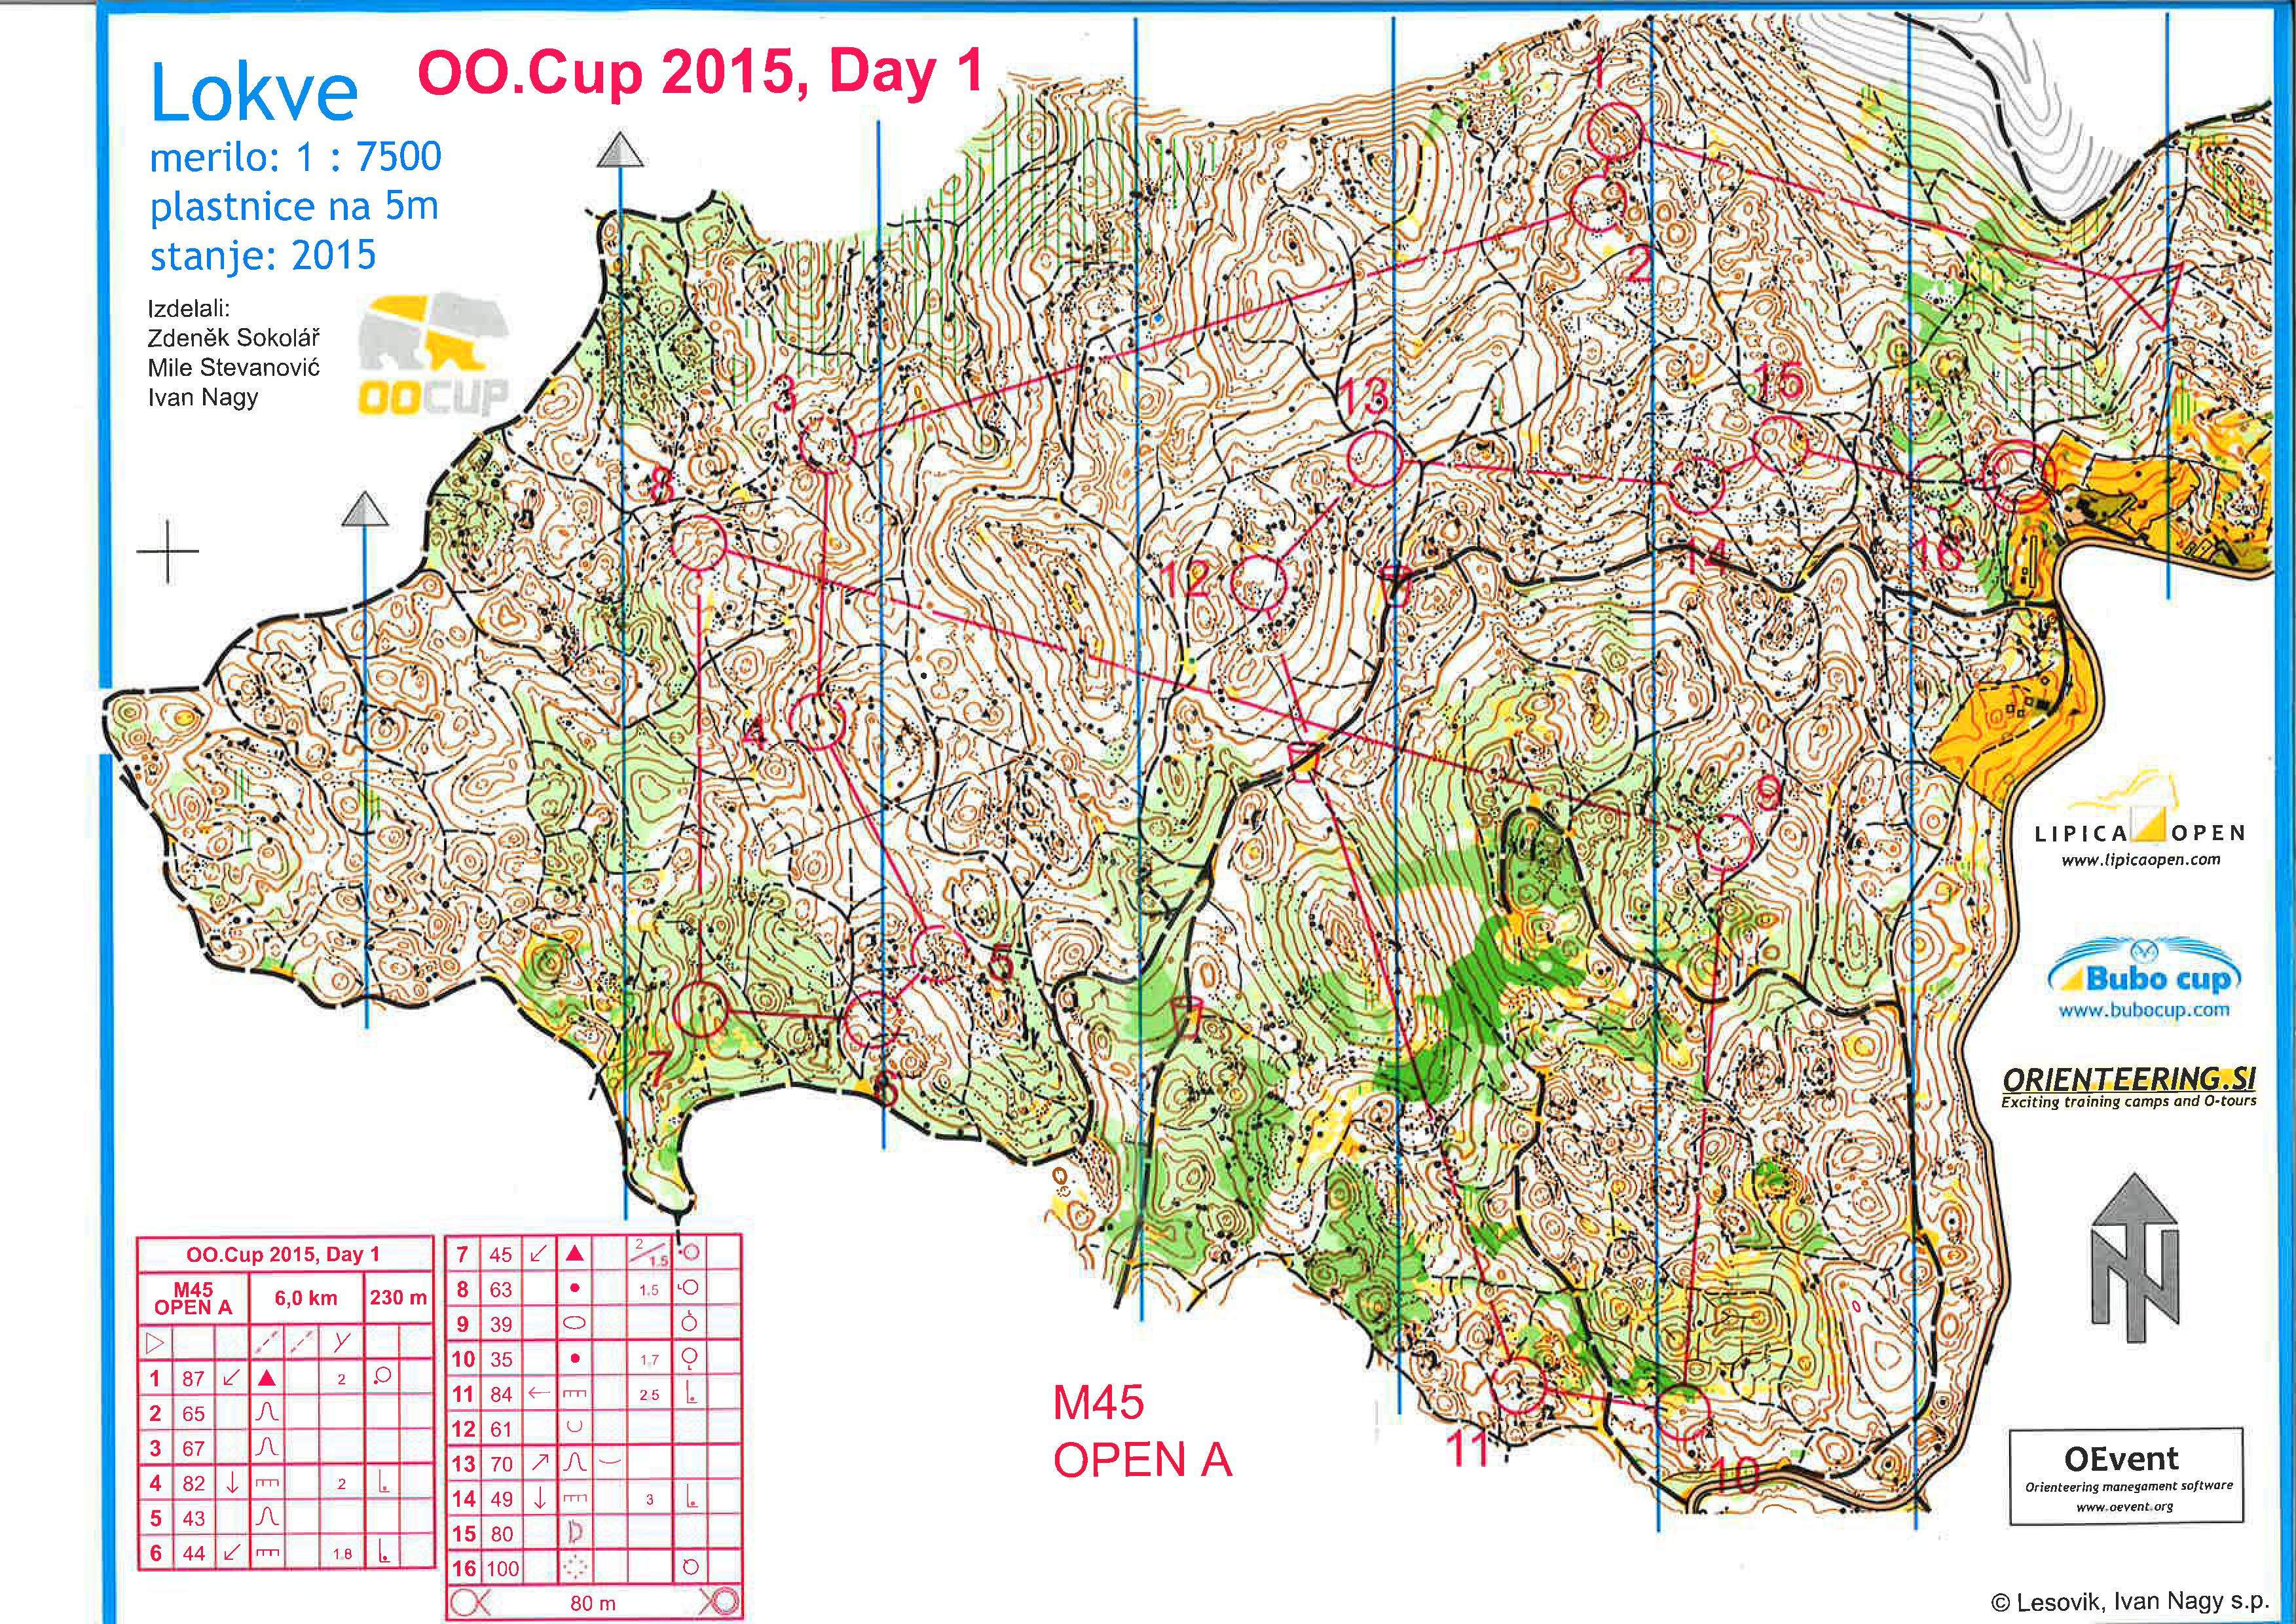 OOCup-Day1 (25/07/2015)